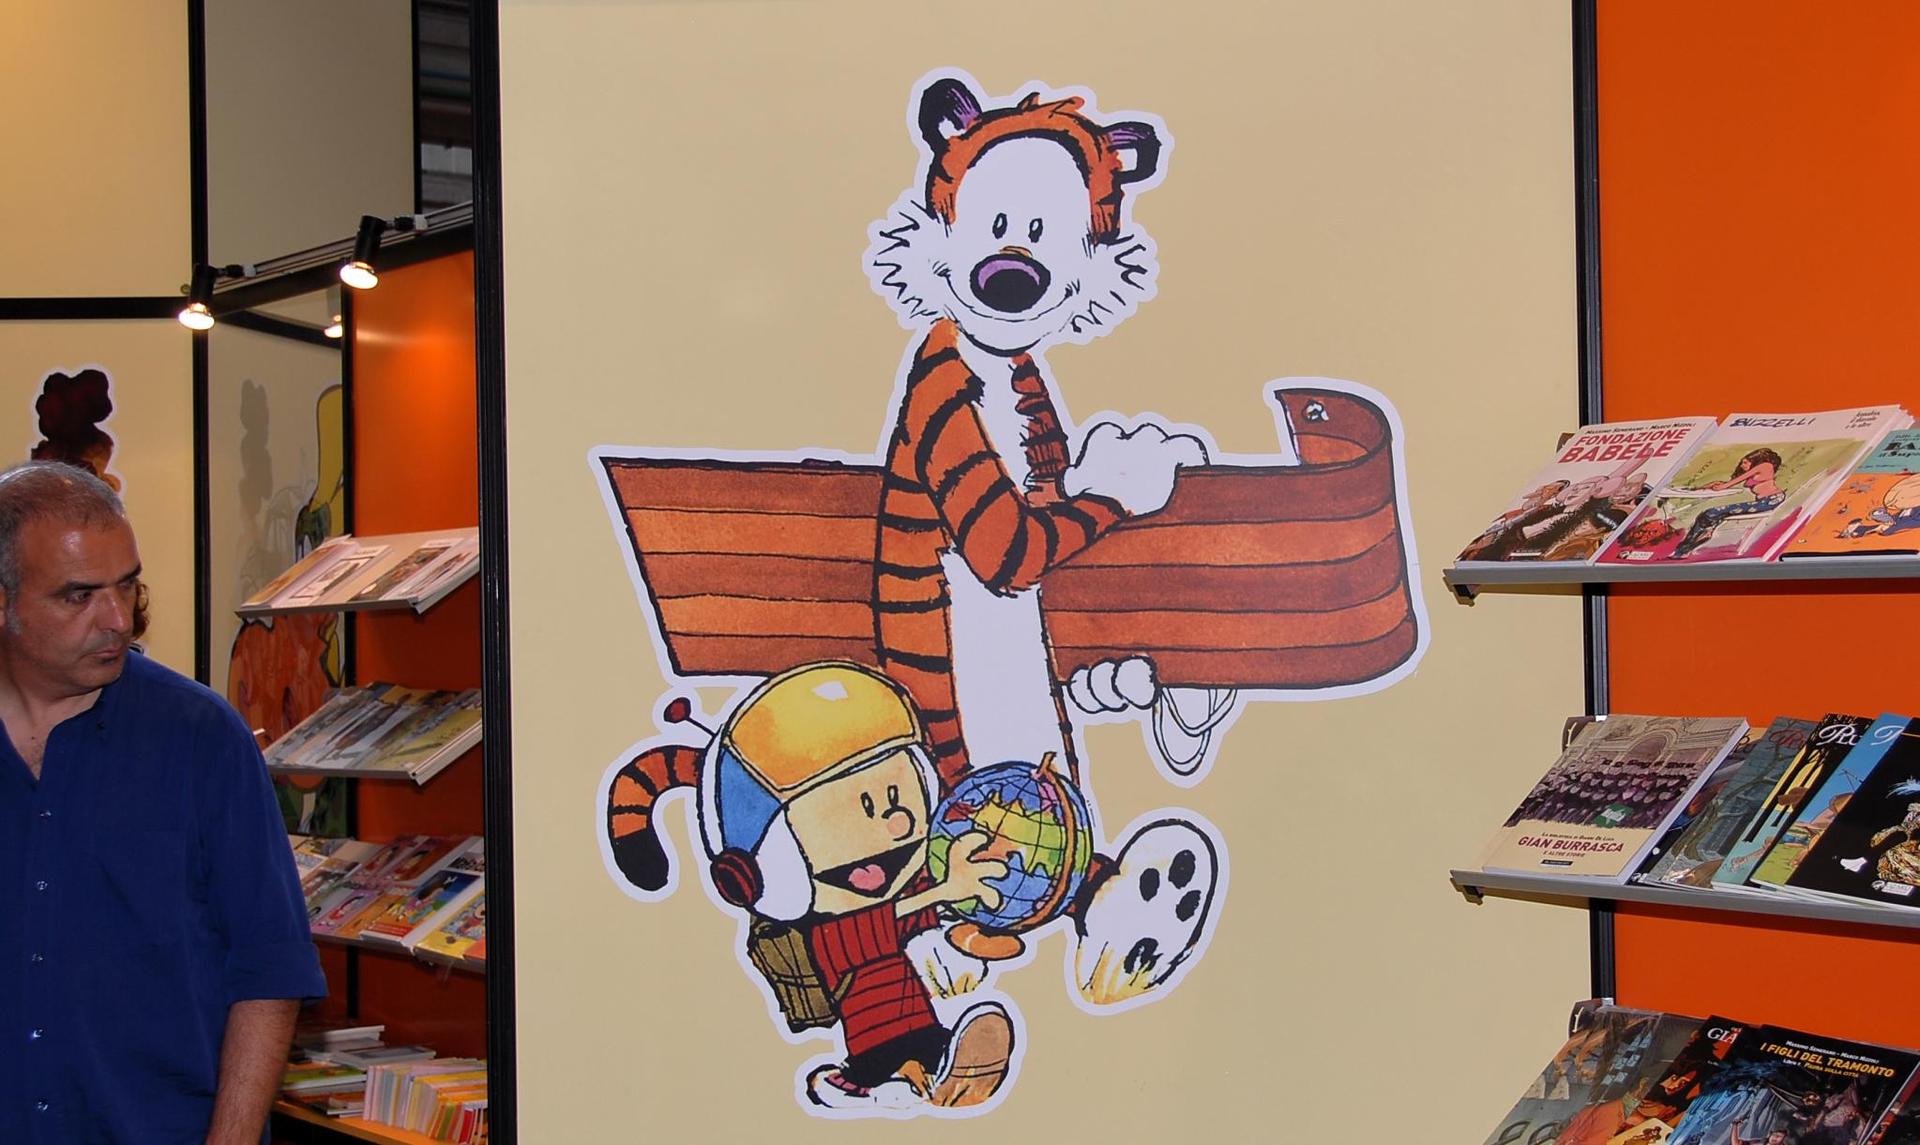 A painting of Calvin and Hobbes graces the wall of a comic book shop.